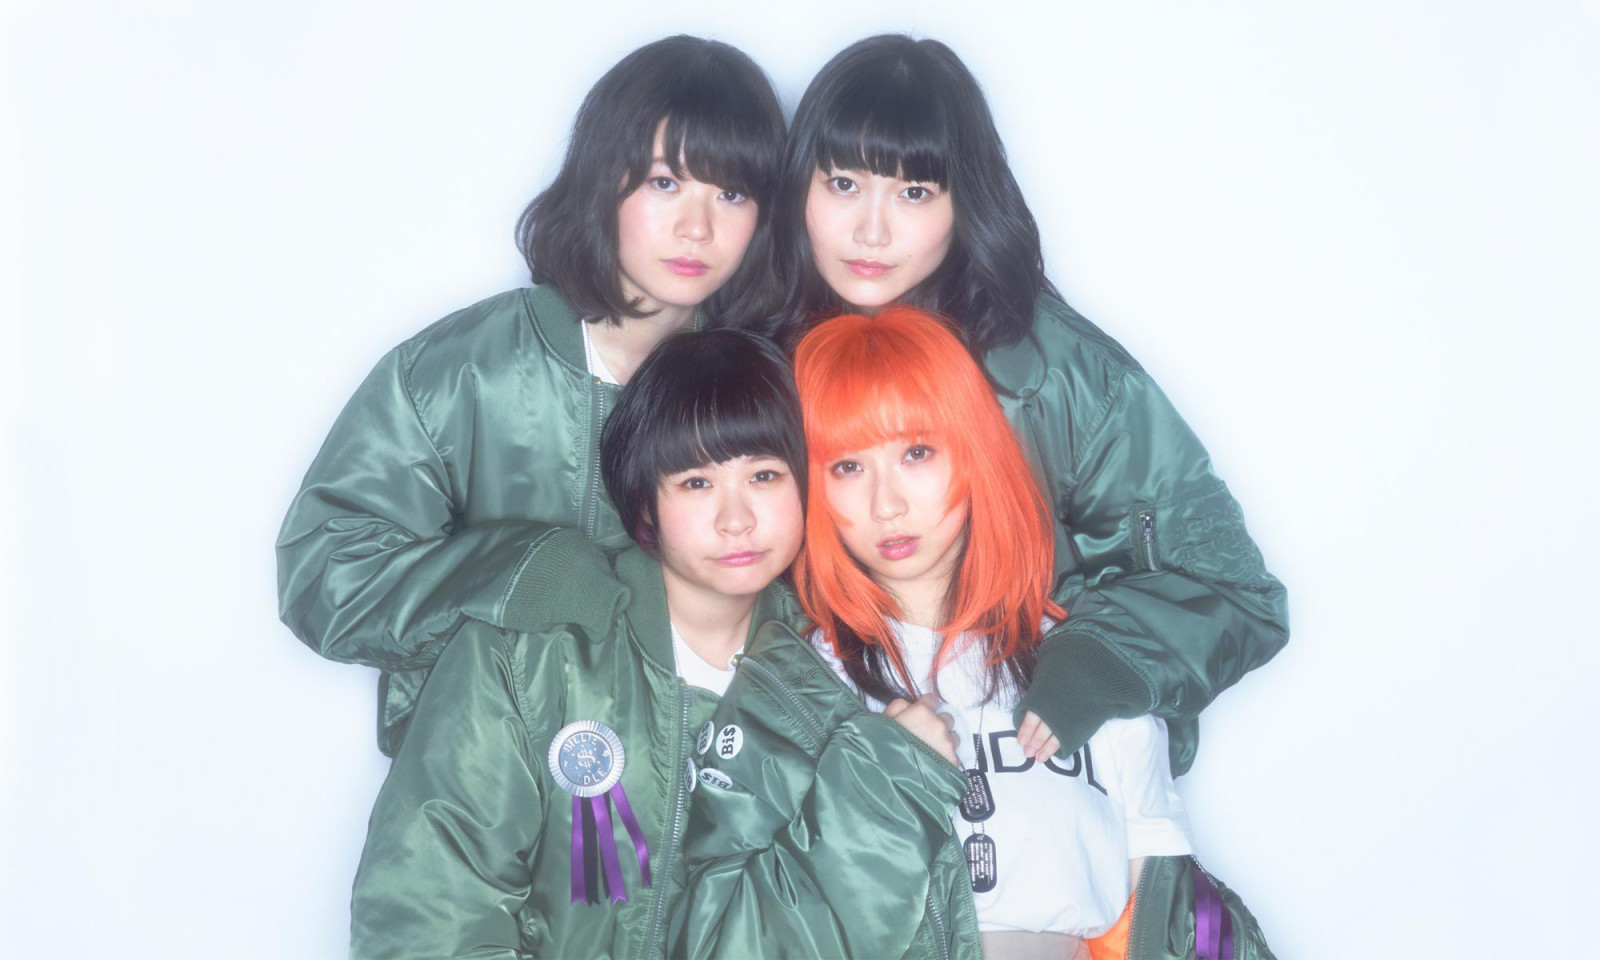 BILLIE IDLE® Causes “anarchy in the music scene” With Their 1st MV!